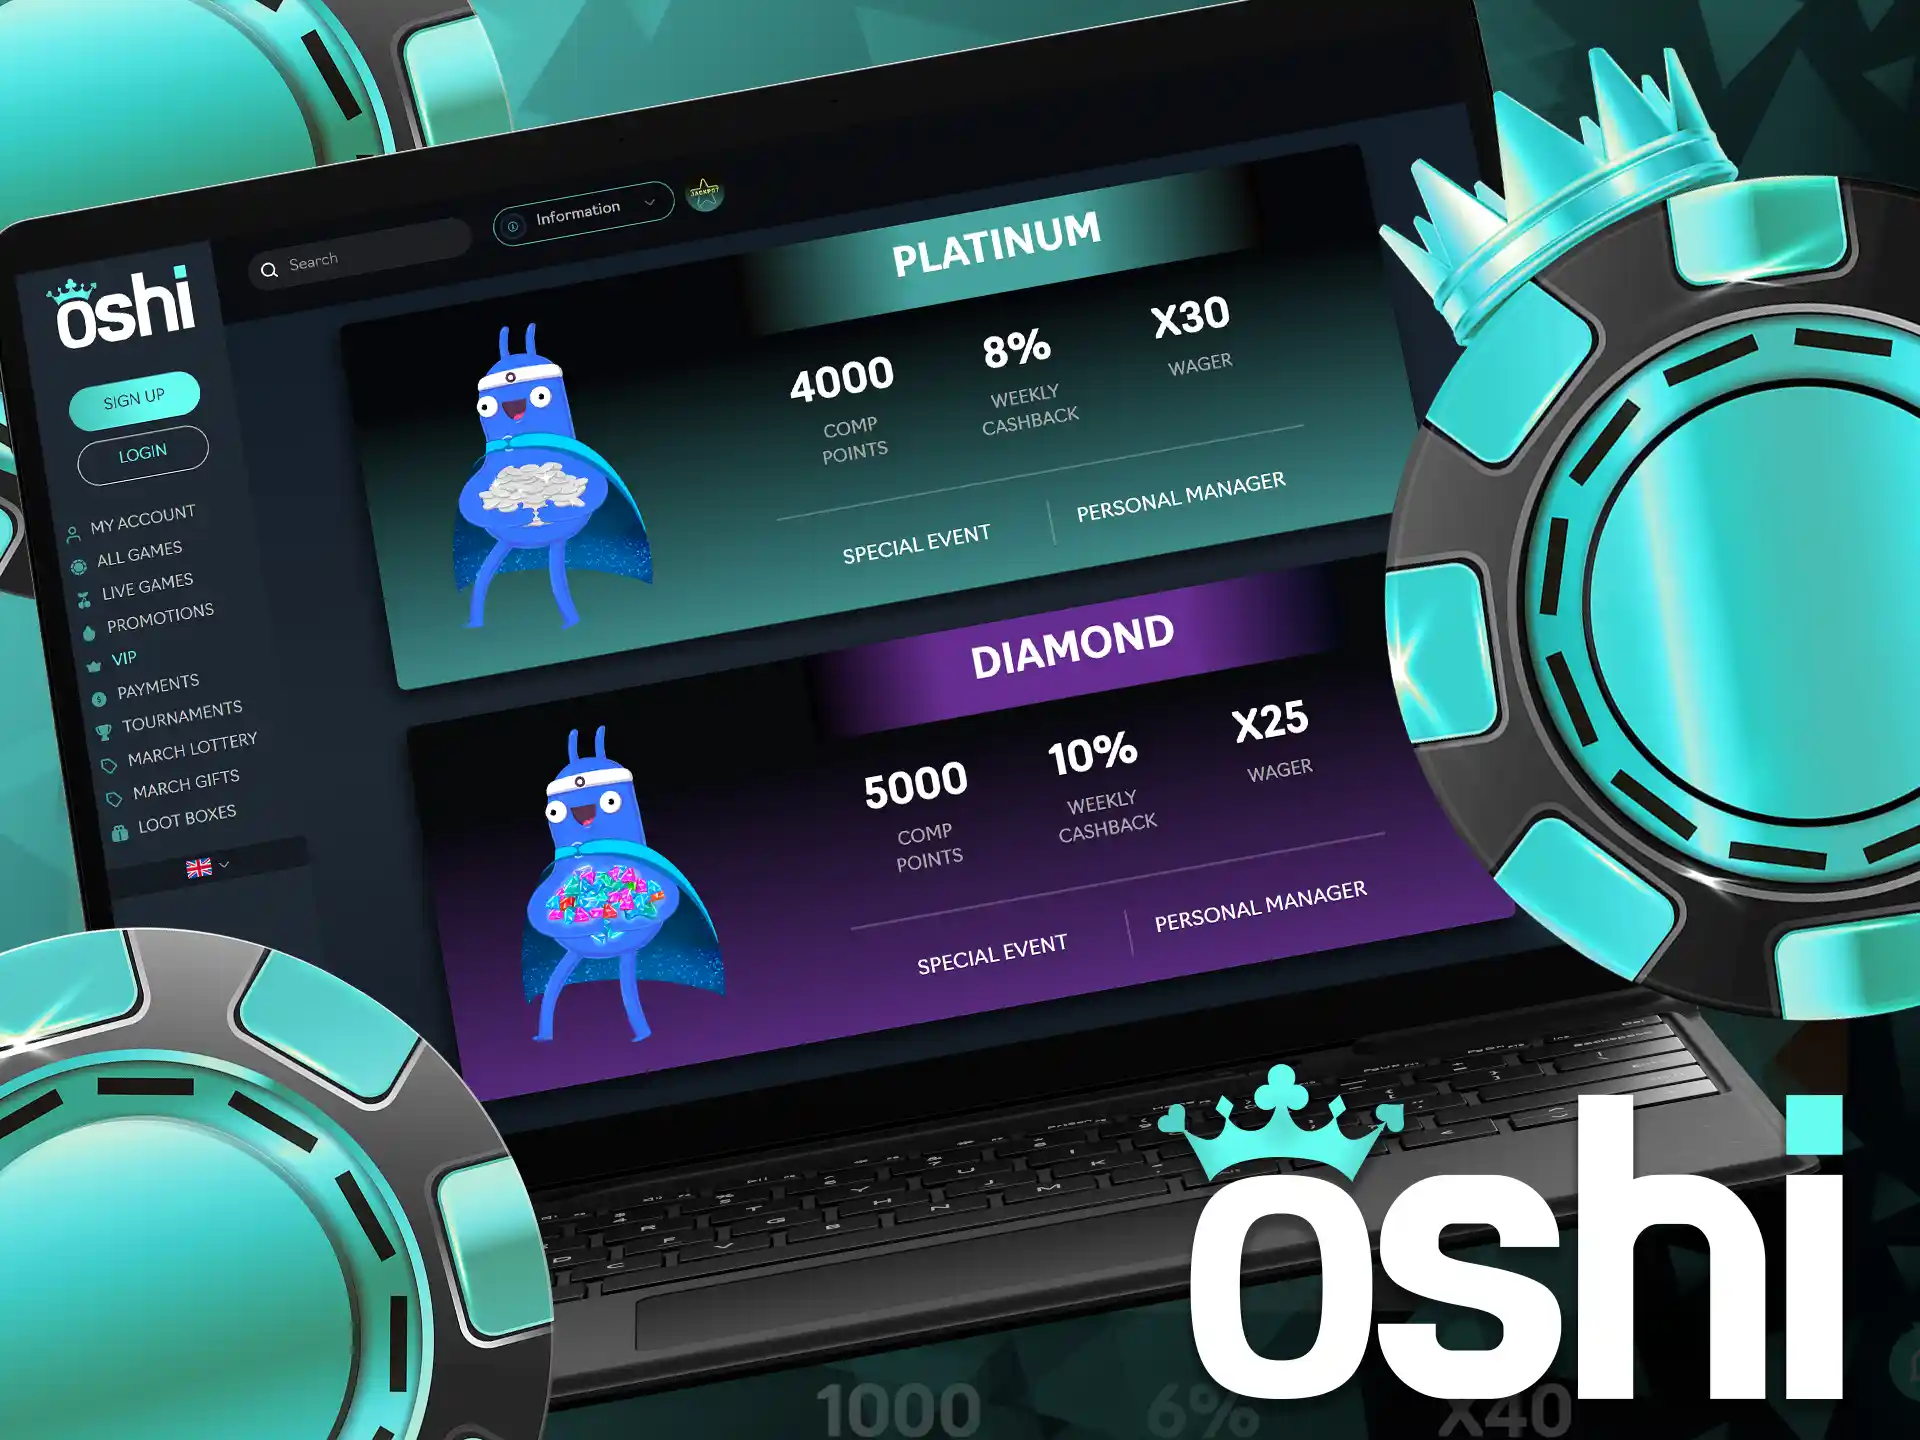 Join the Oshi Online Casino VIP Club and receive exclusive gifts!